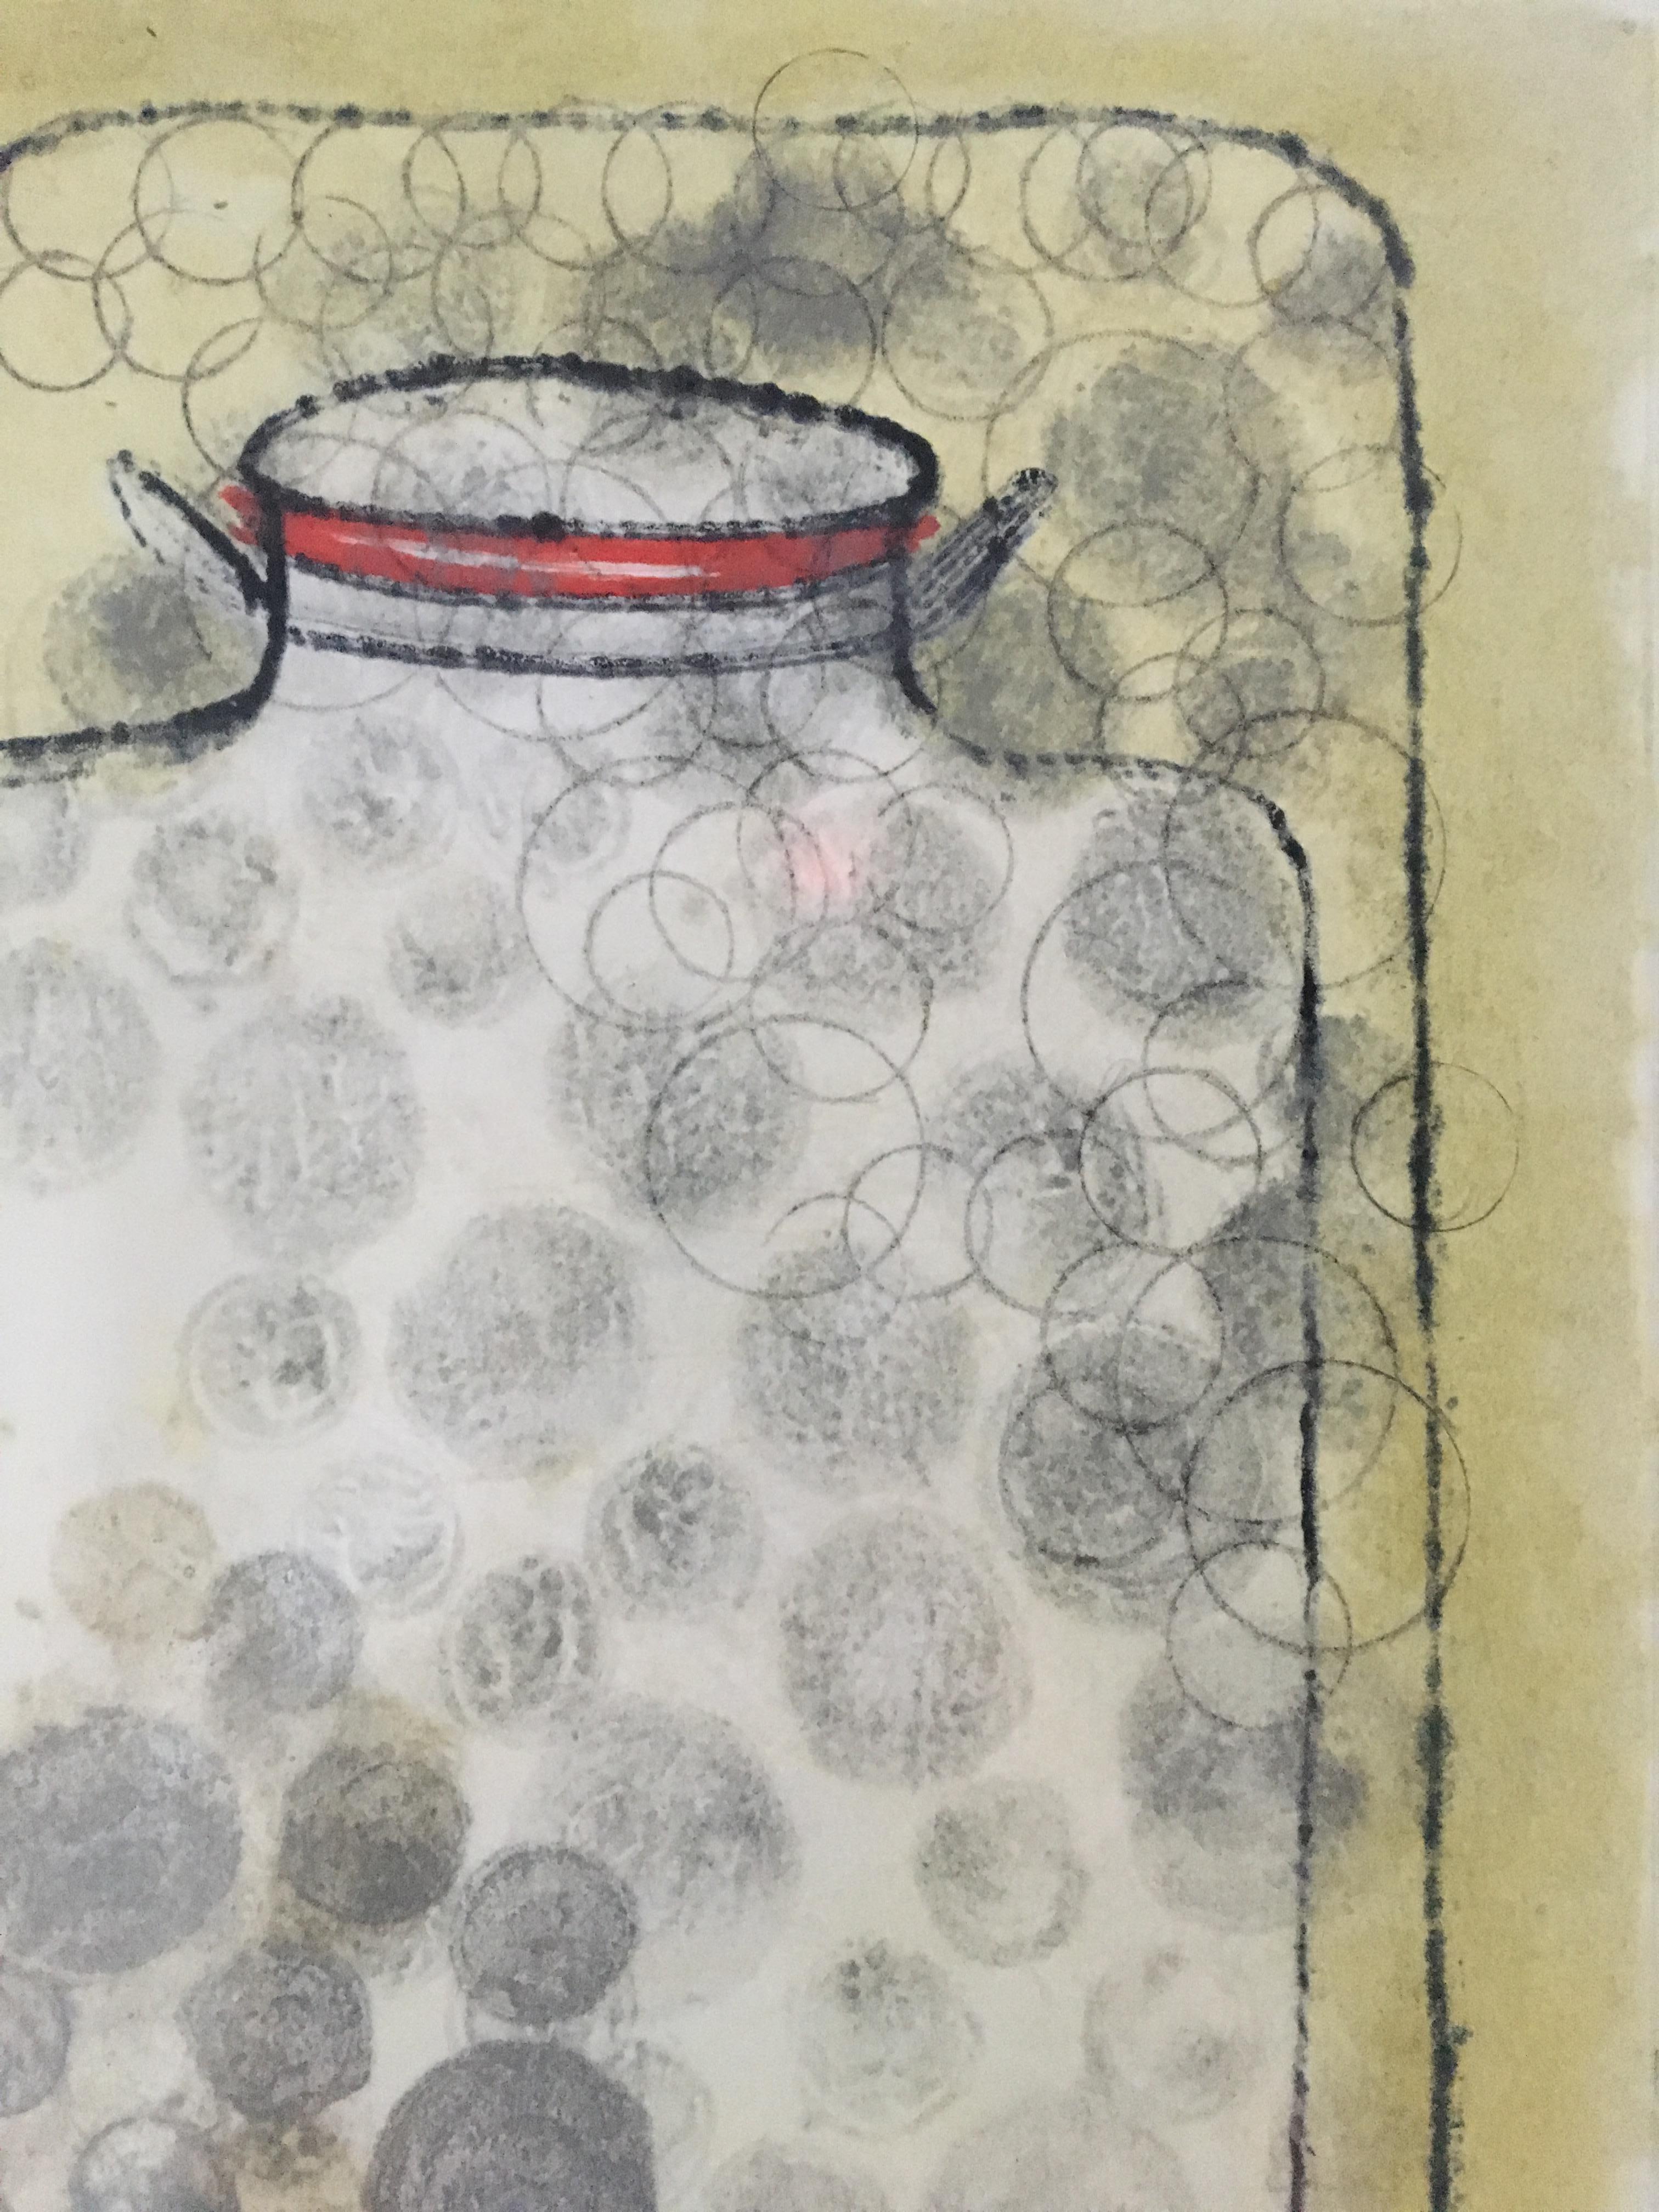 Lost Jar 4 - Contemporary Print by Christiane Corcelle